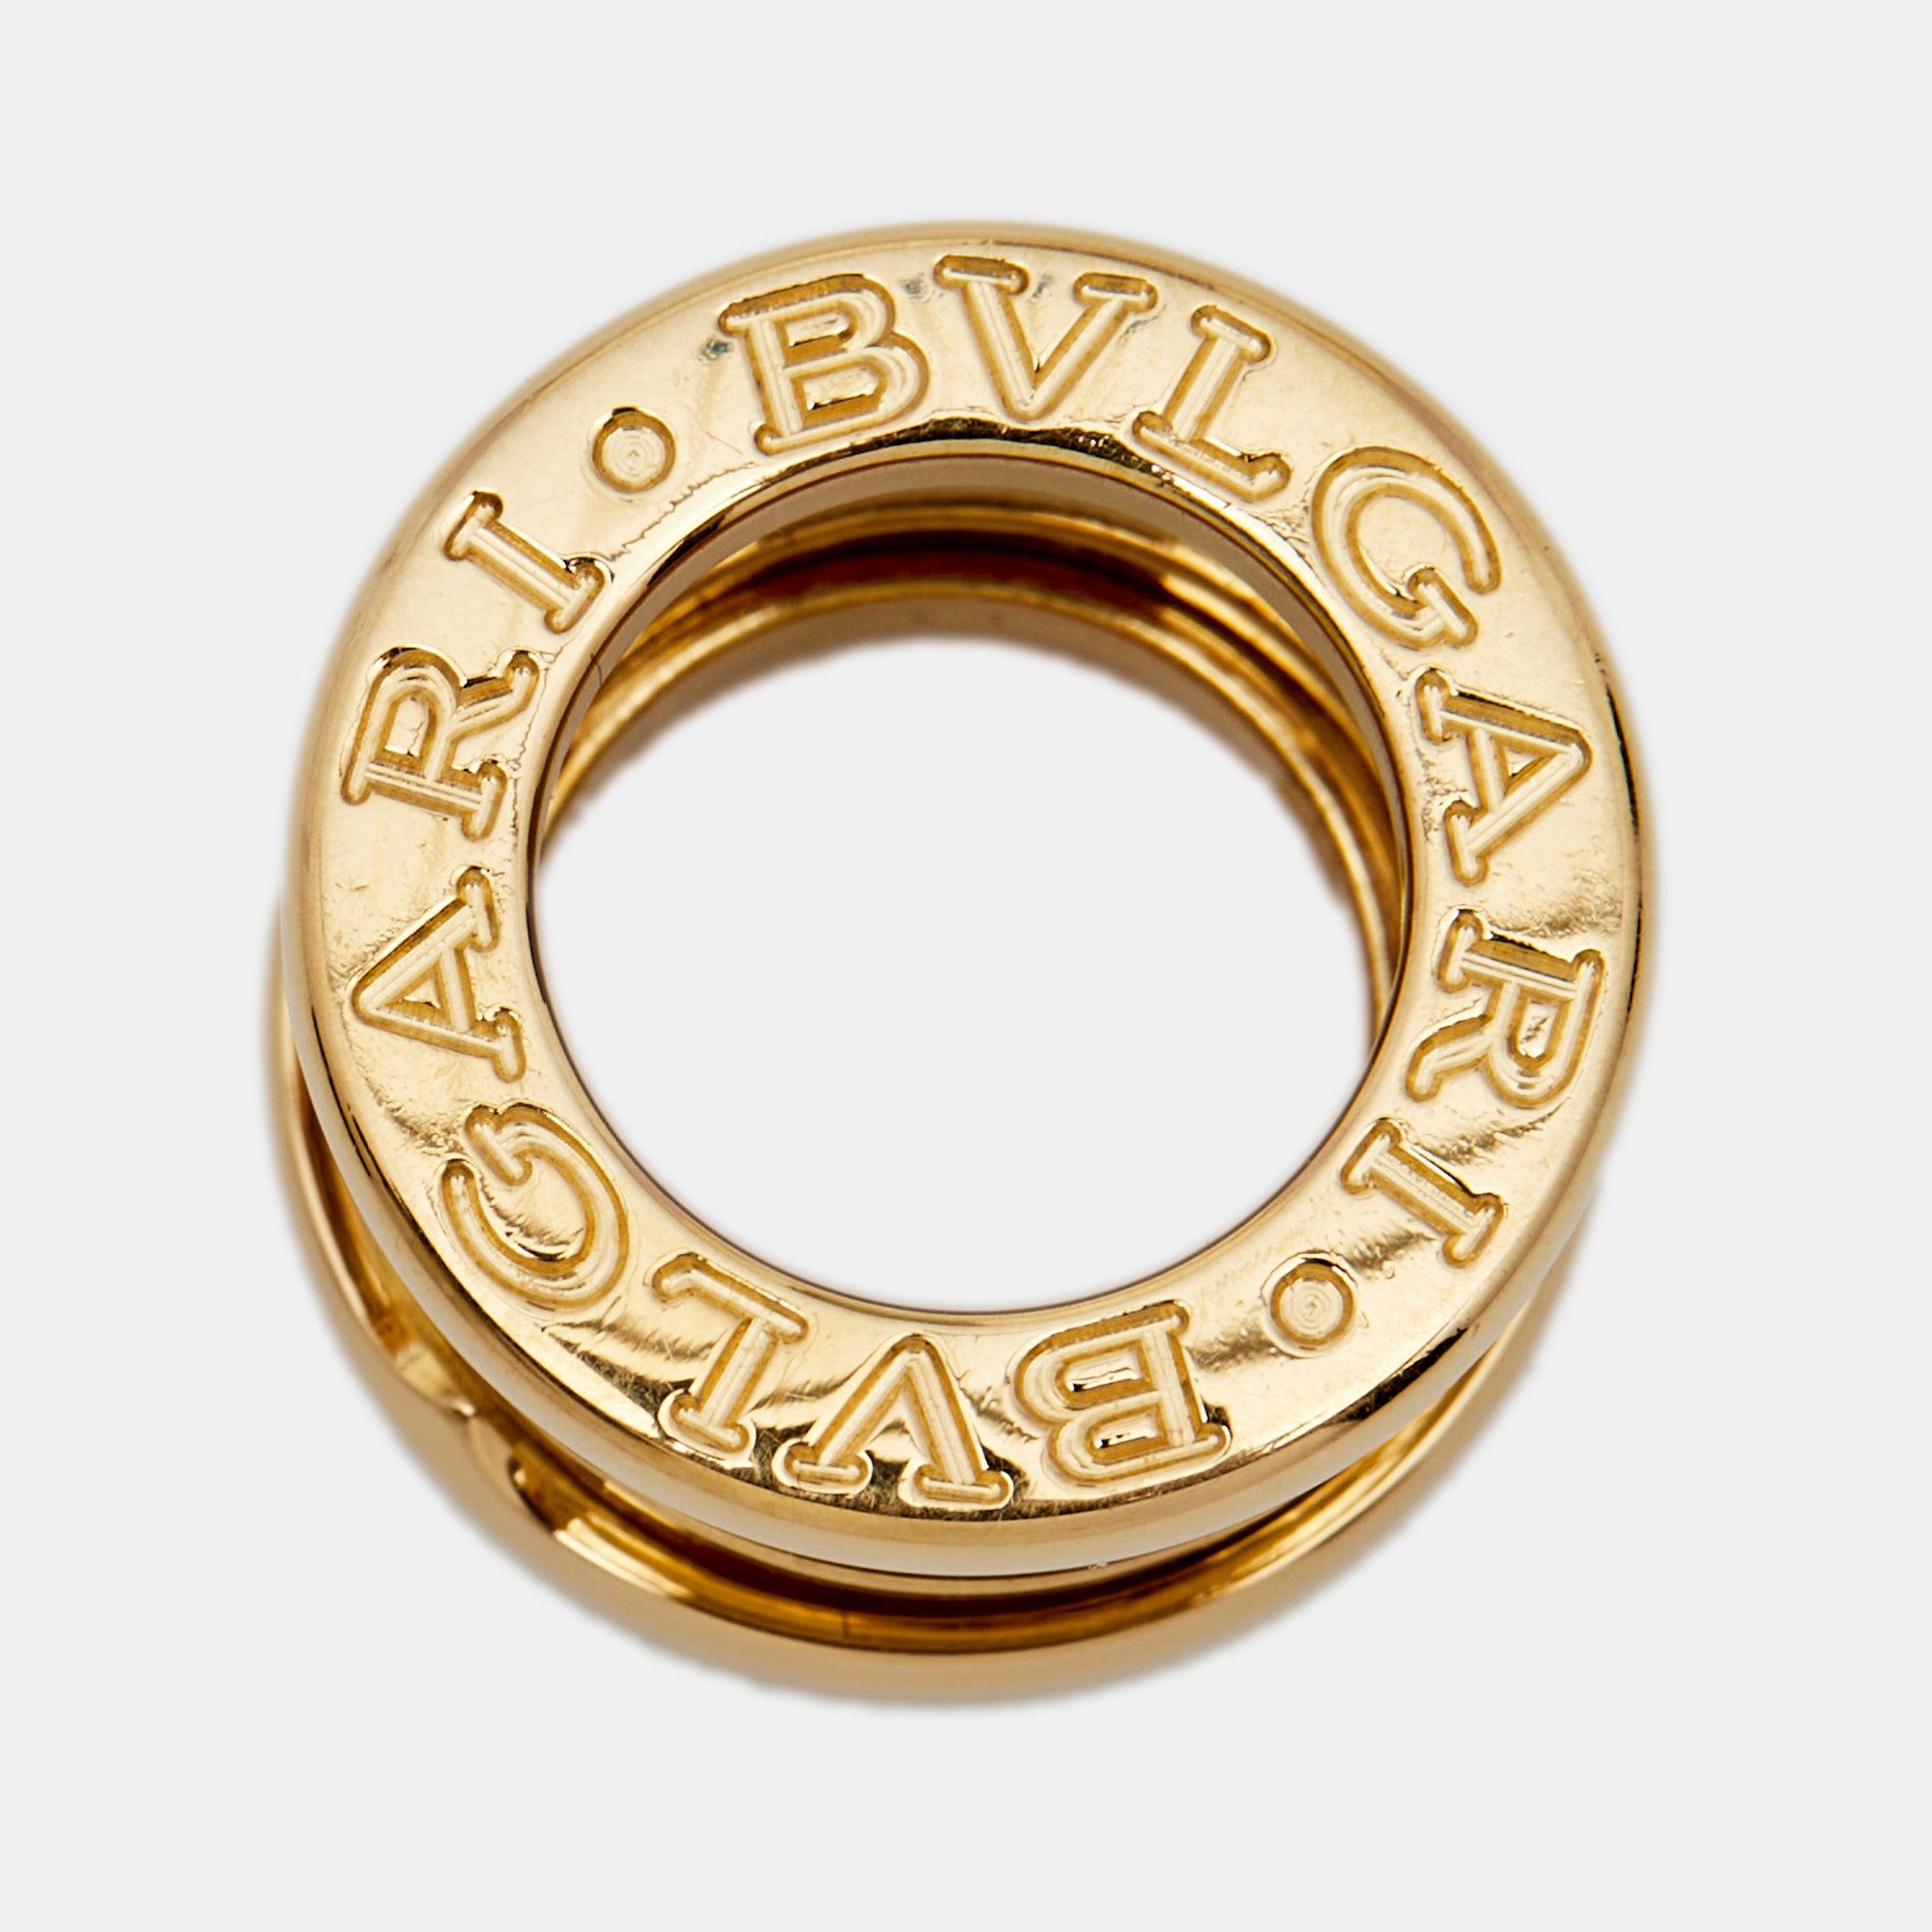 This iconic and unique Bvlgari B.Zero1 pendant stands out for its distinctive design and sleek style. Taking inspiration from the renowned amphitheatre of the world, the Colosseum, this alluring piece is fashioned in 18K yellow gold and elevated